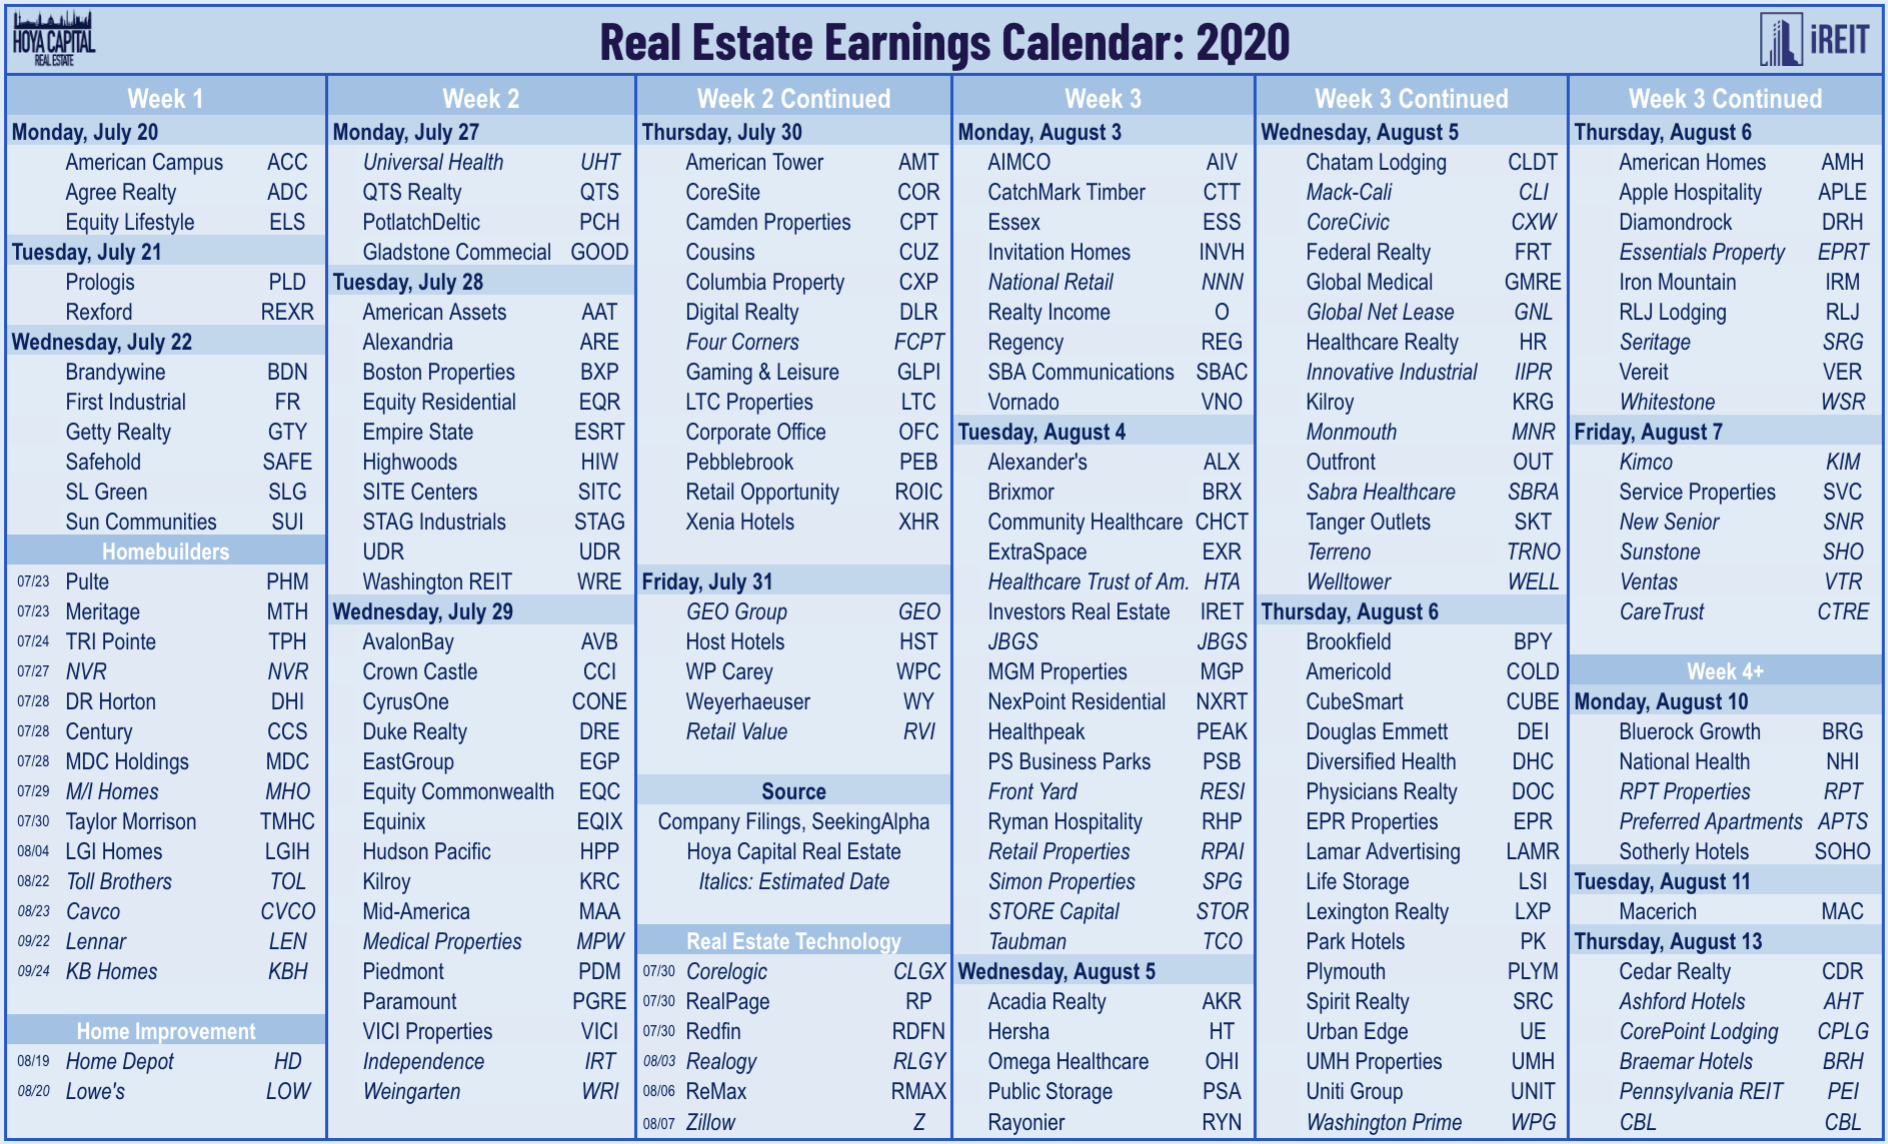 Dividend Cuts And Overdue Rent: Previewing REIT Earnings Season